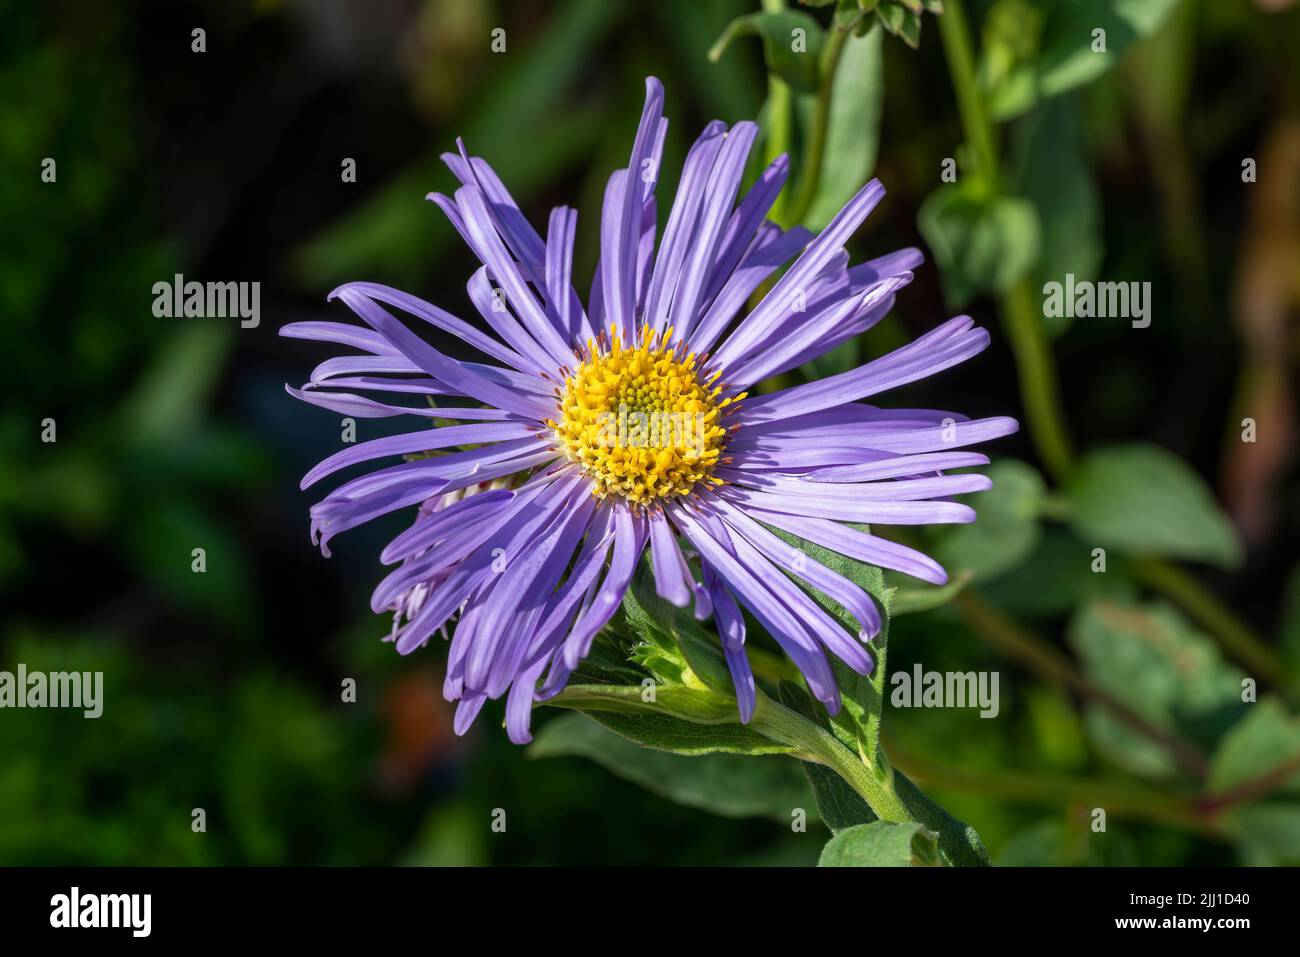 Aster x frikartii 'Wunder von Stafa' a lavender blue herbaceous perennial summer autumn flower plant commonly known as Michaelmas daisy, stock photo i Stock Photo